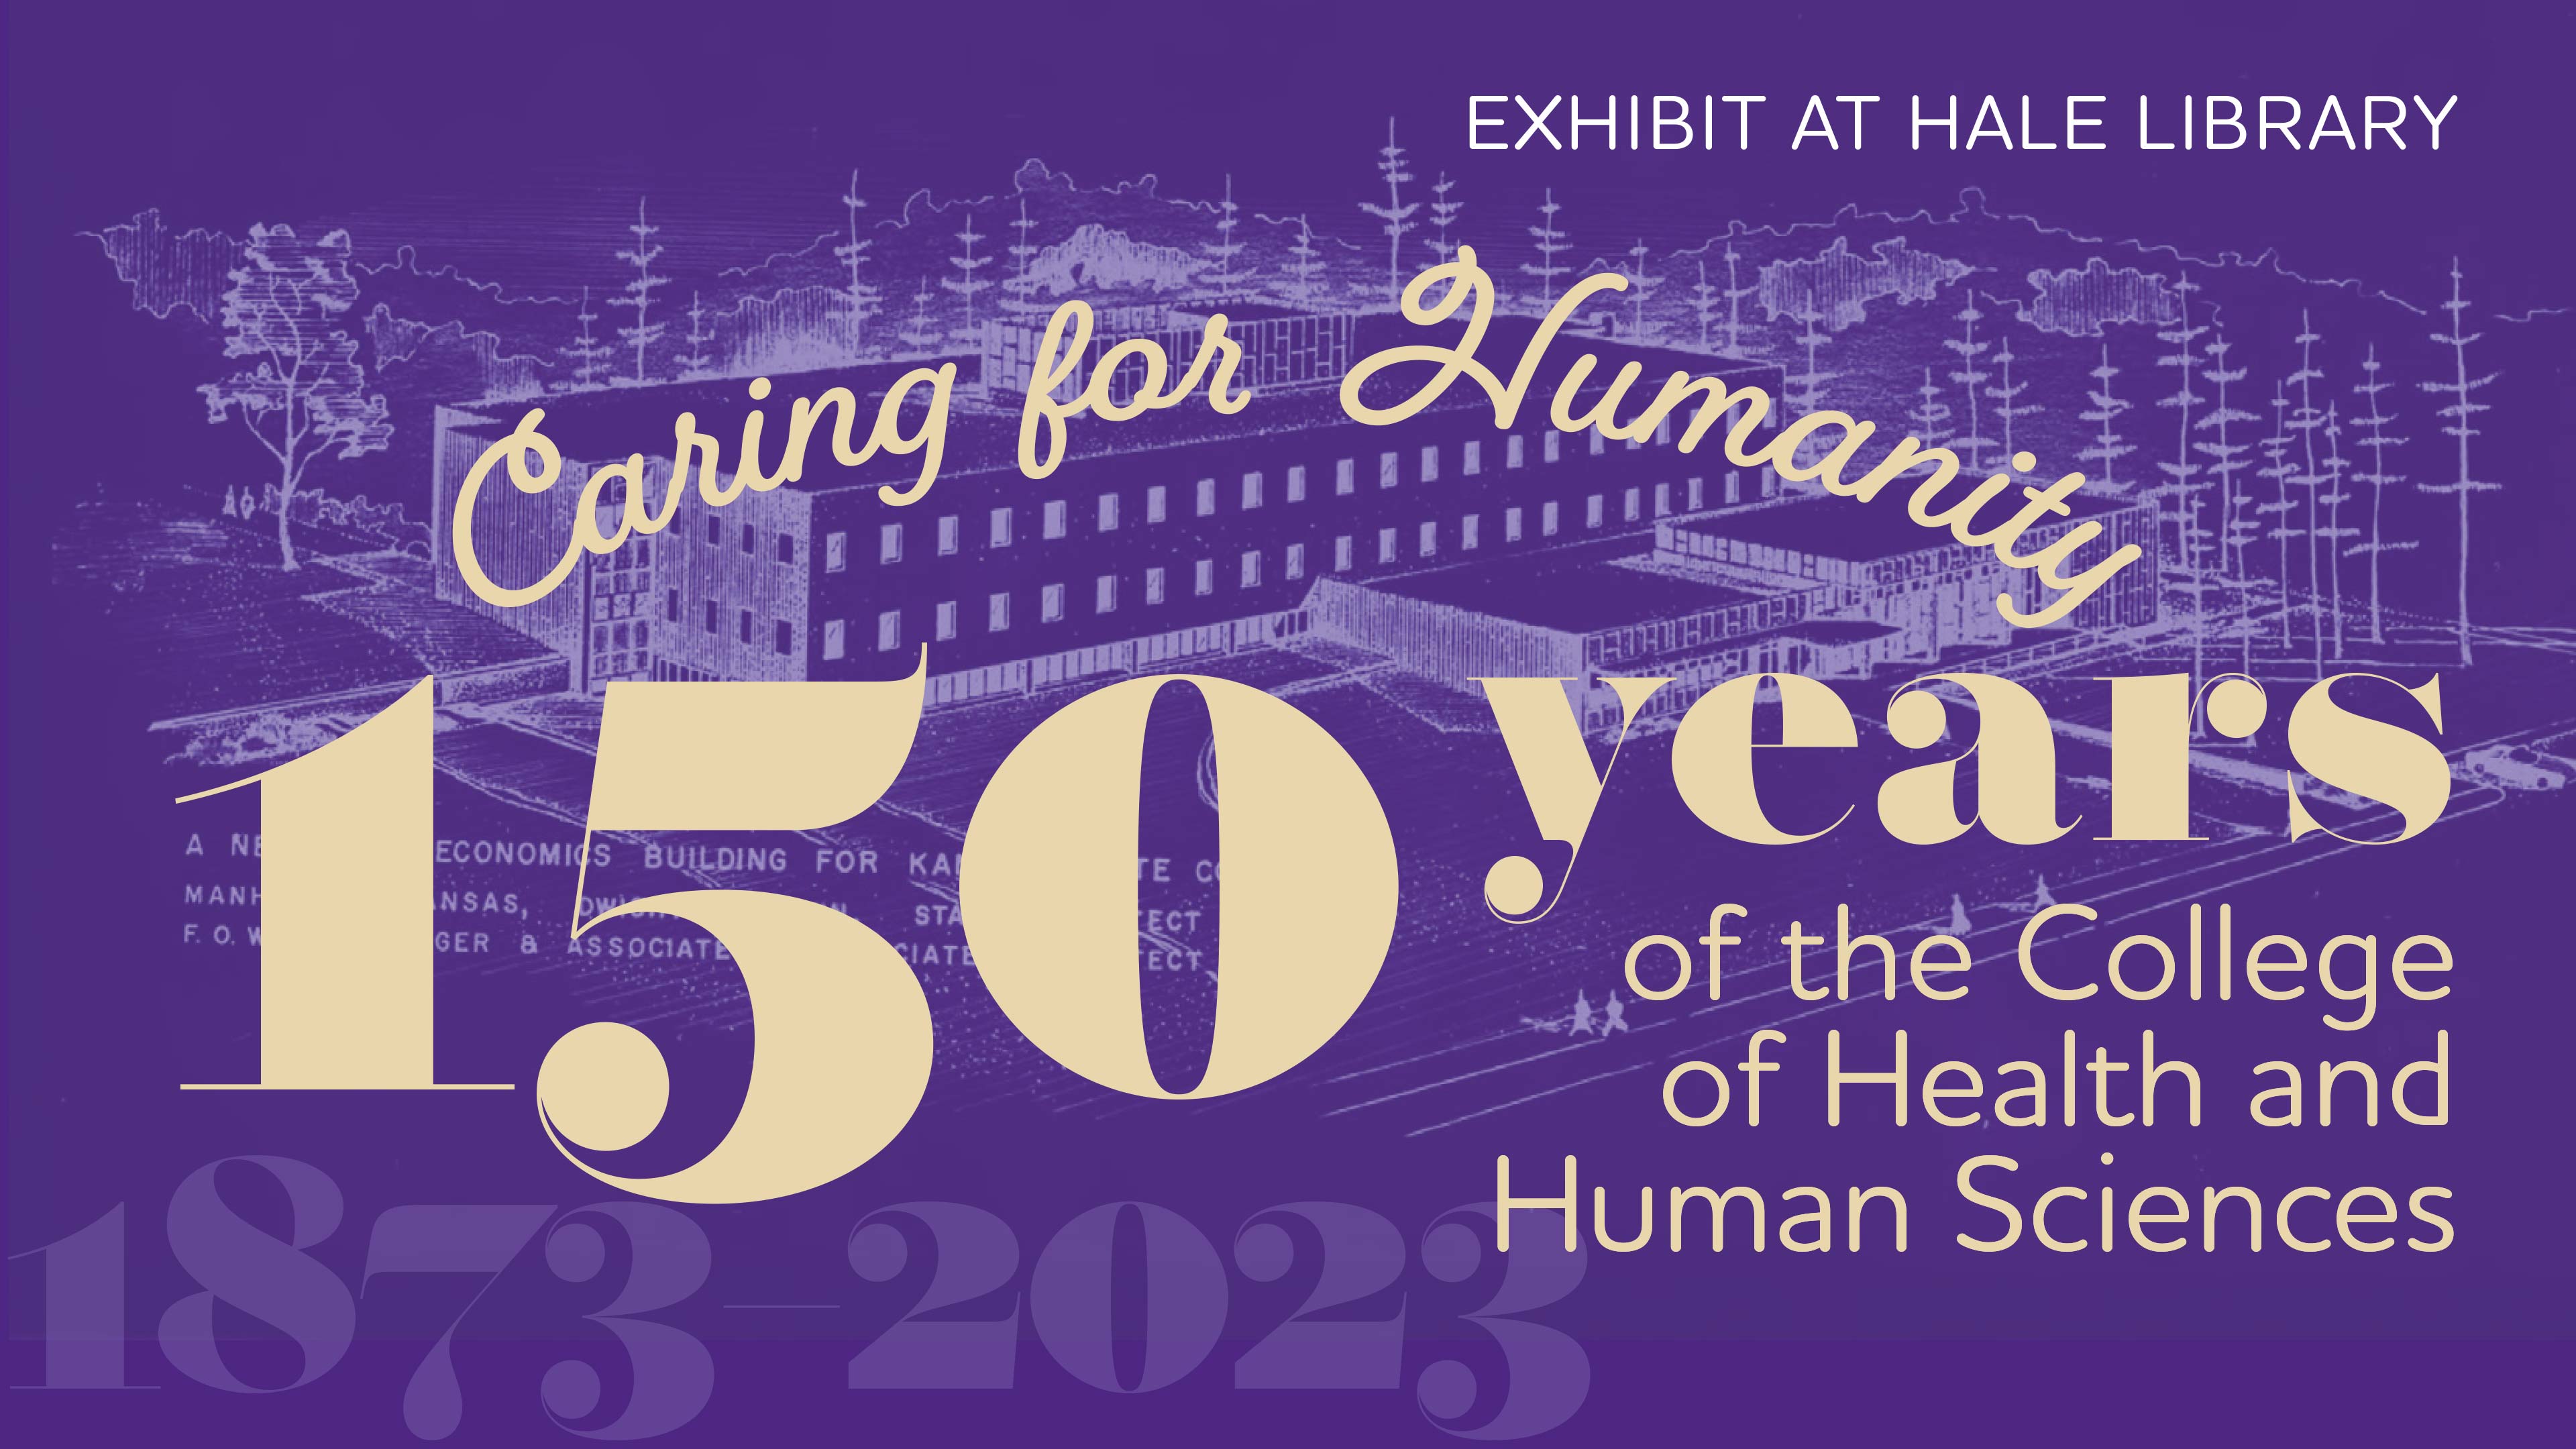 Image of Caring for Humanity: 150 Years of the College of Health and Human Sciences exhibit banner